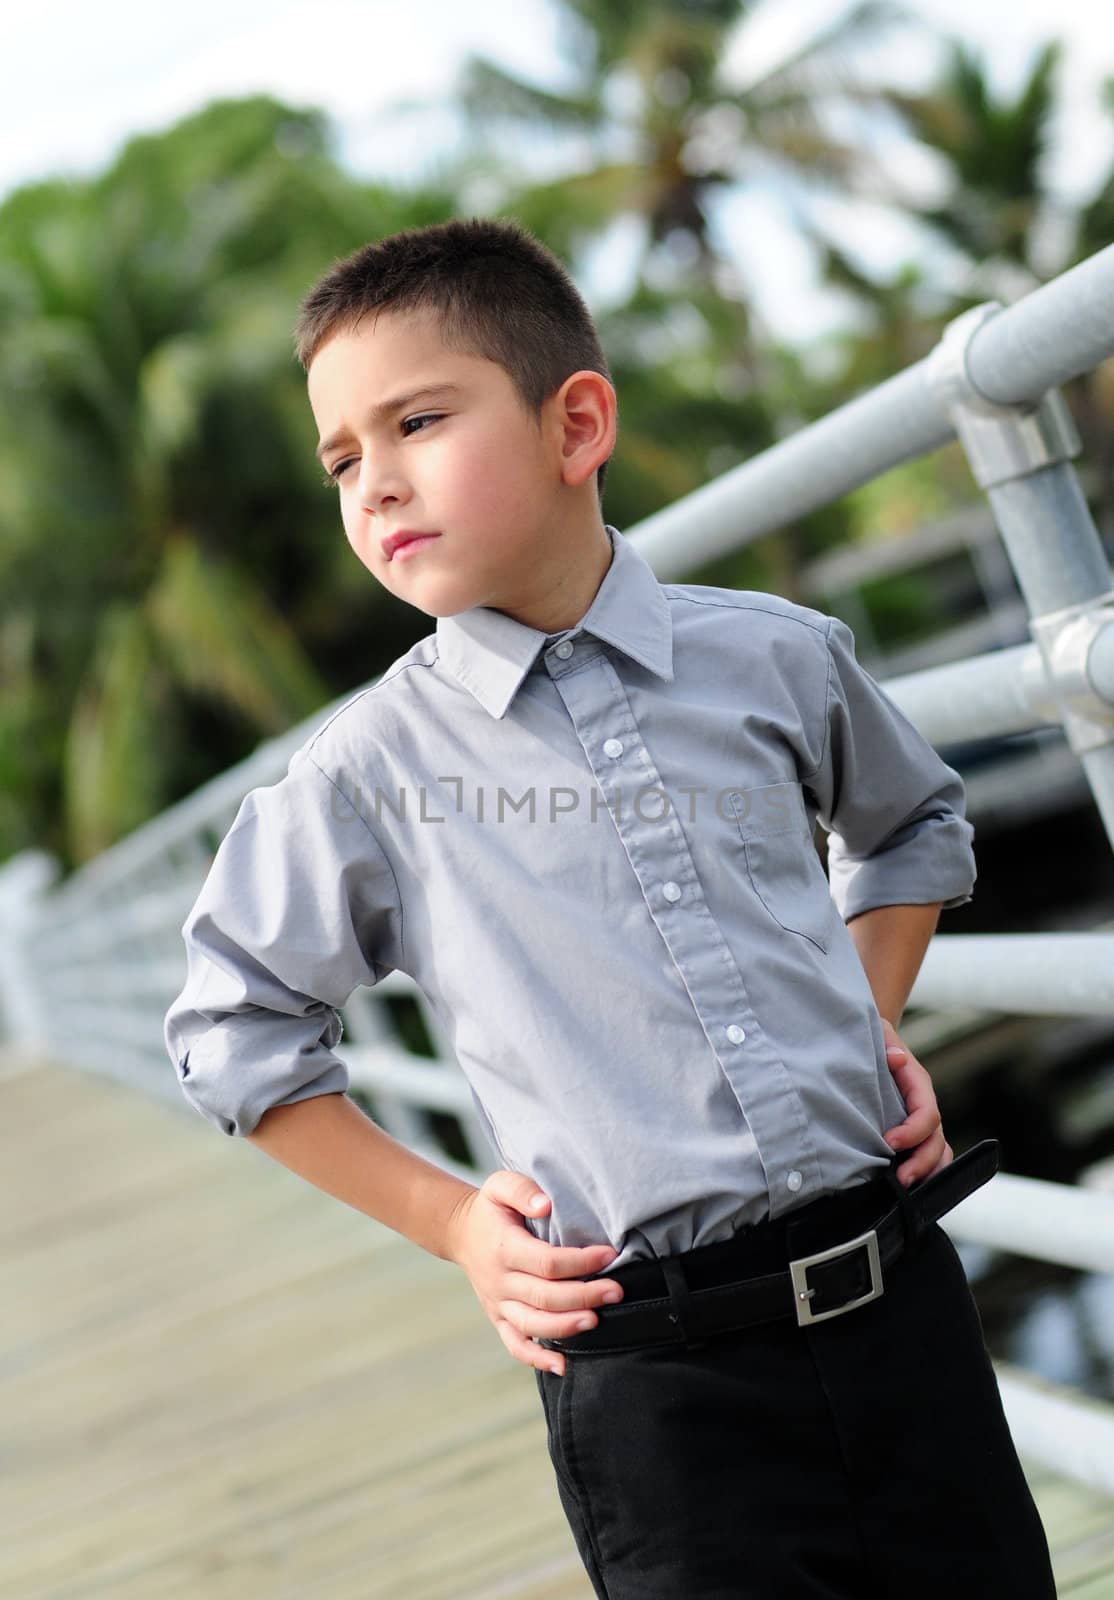 Serious young boy outdoors with hands on hips